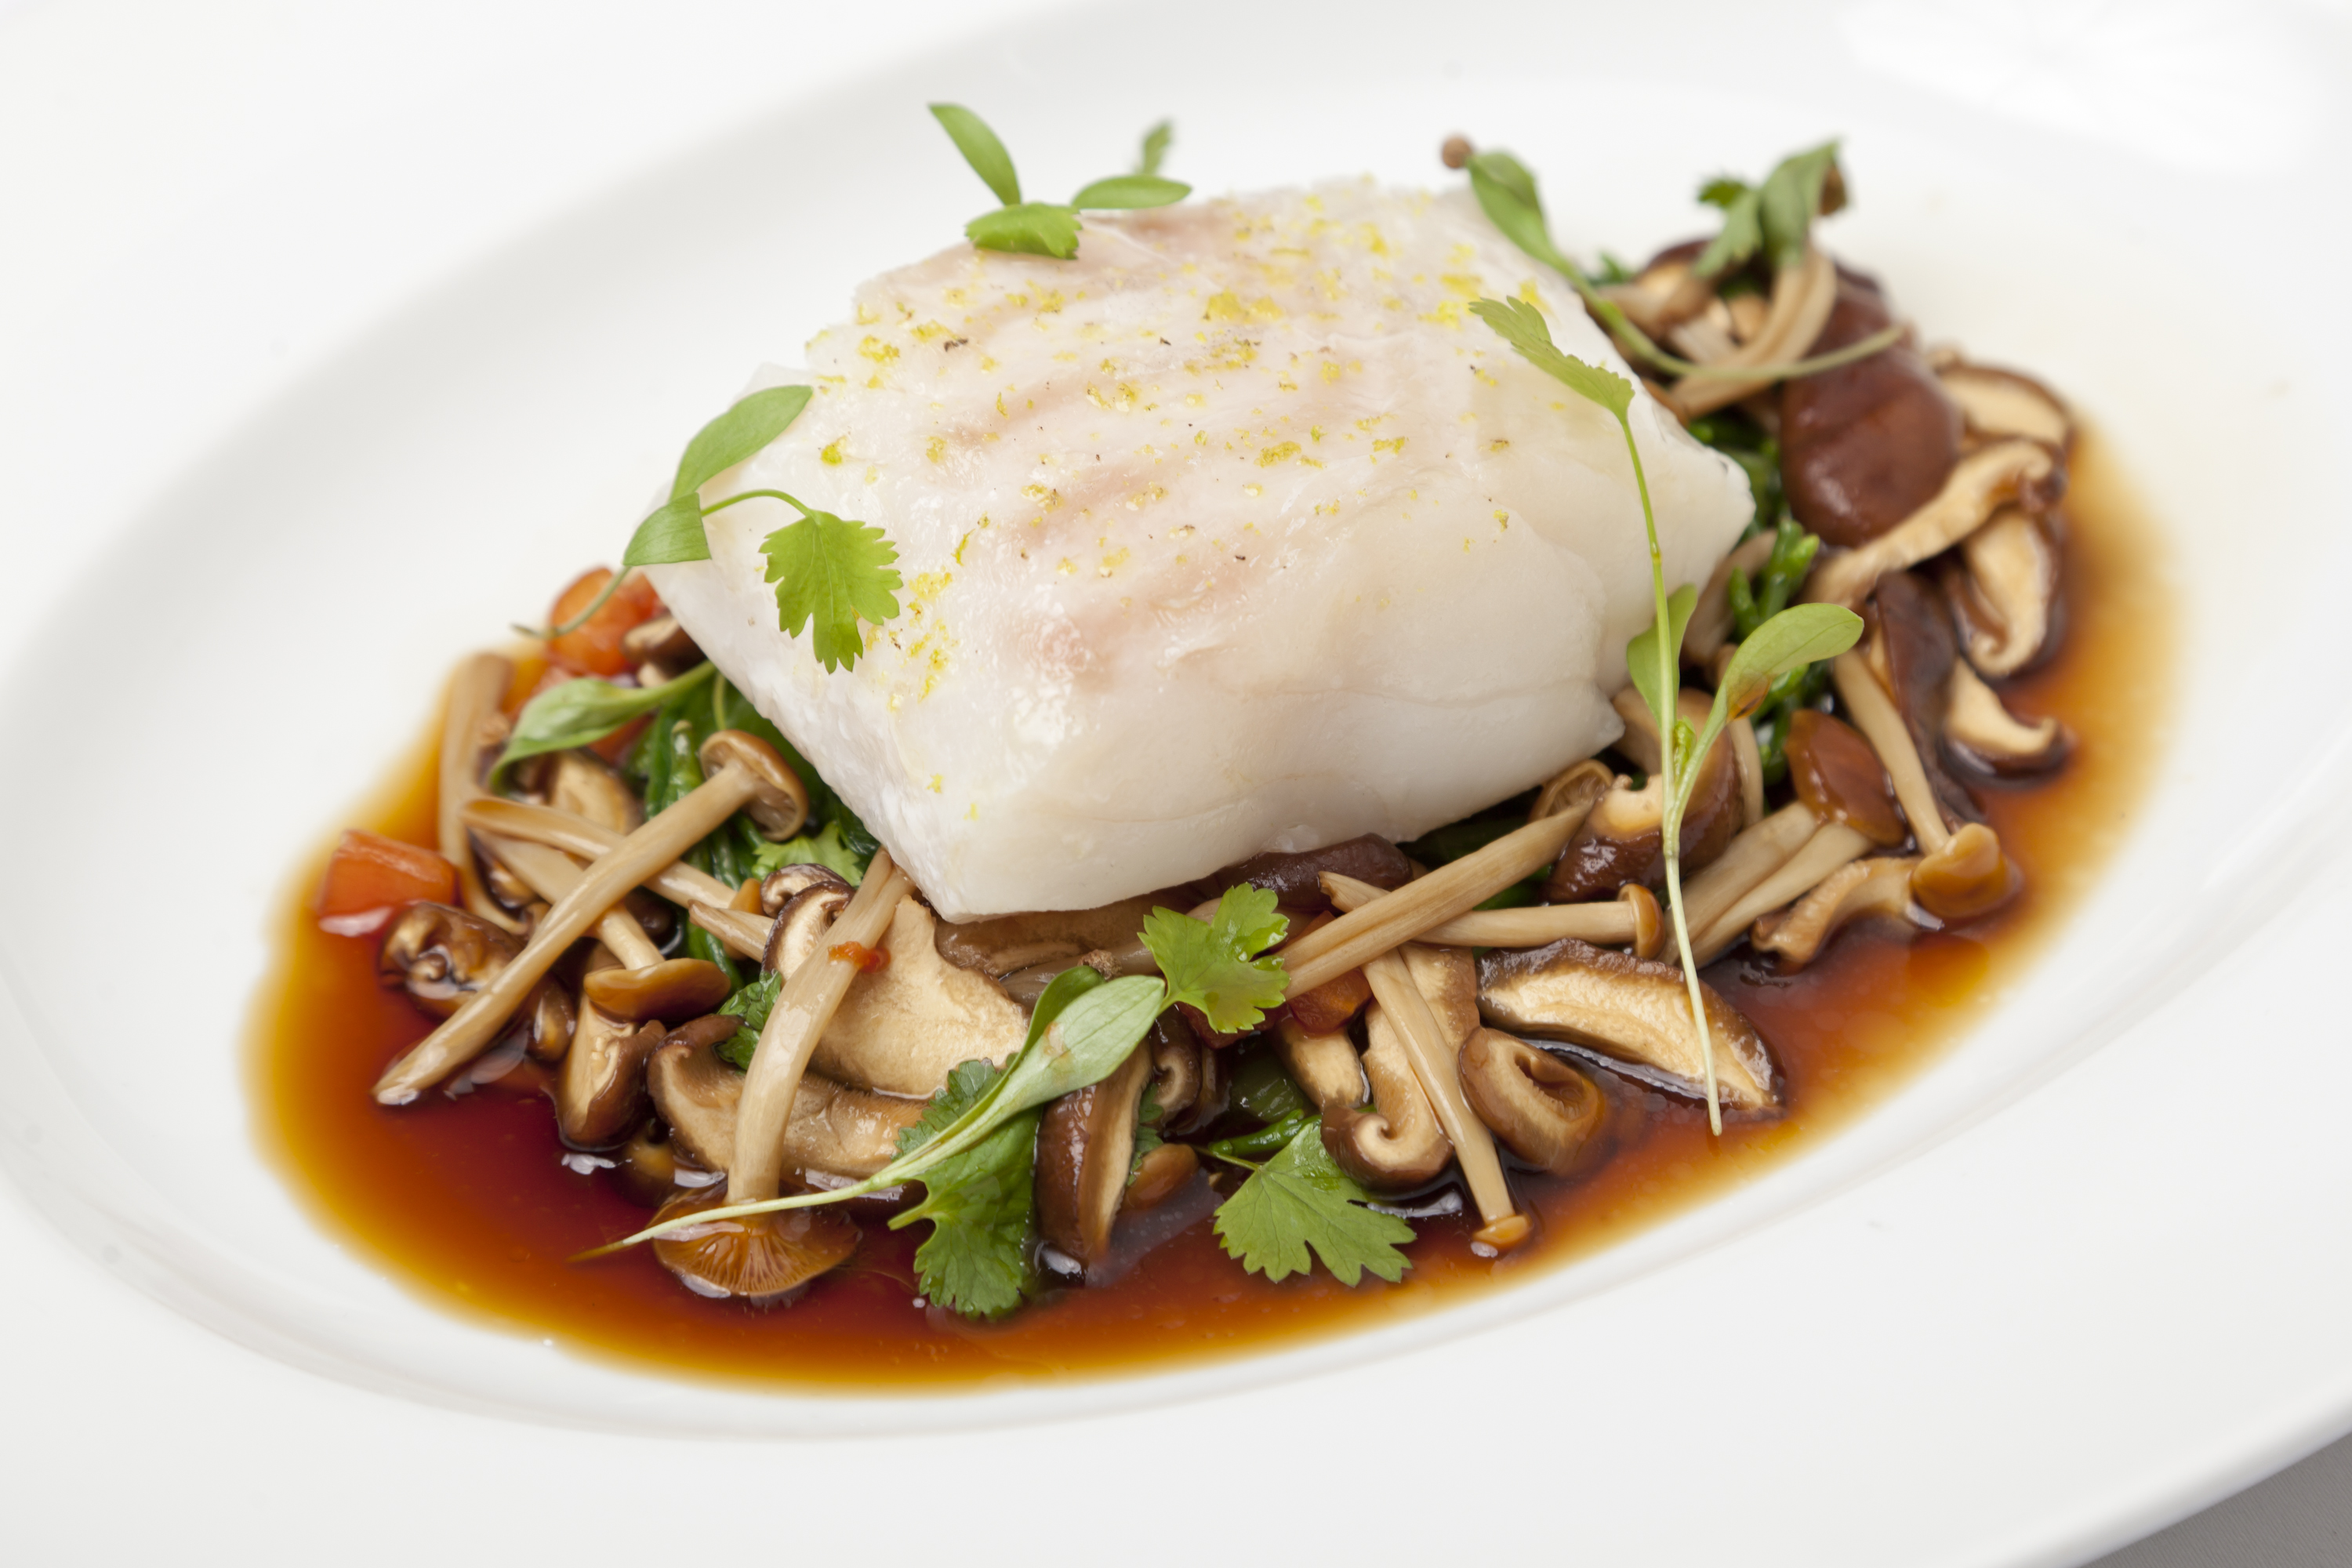 Sous Vide Cod Recipe: Cooking Cod Using the Sous Vide Method